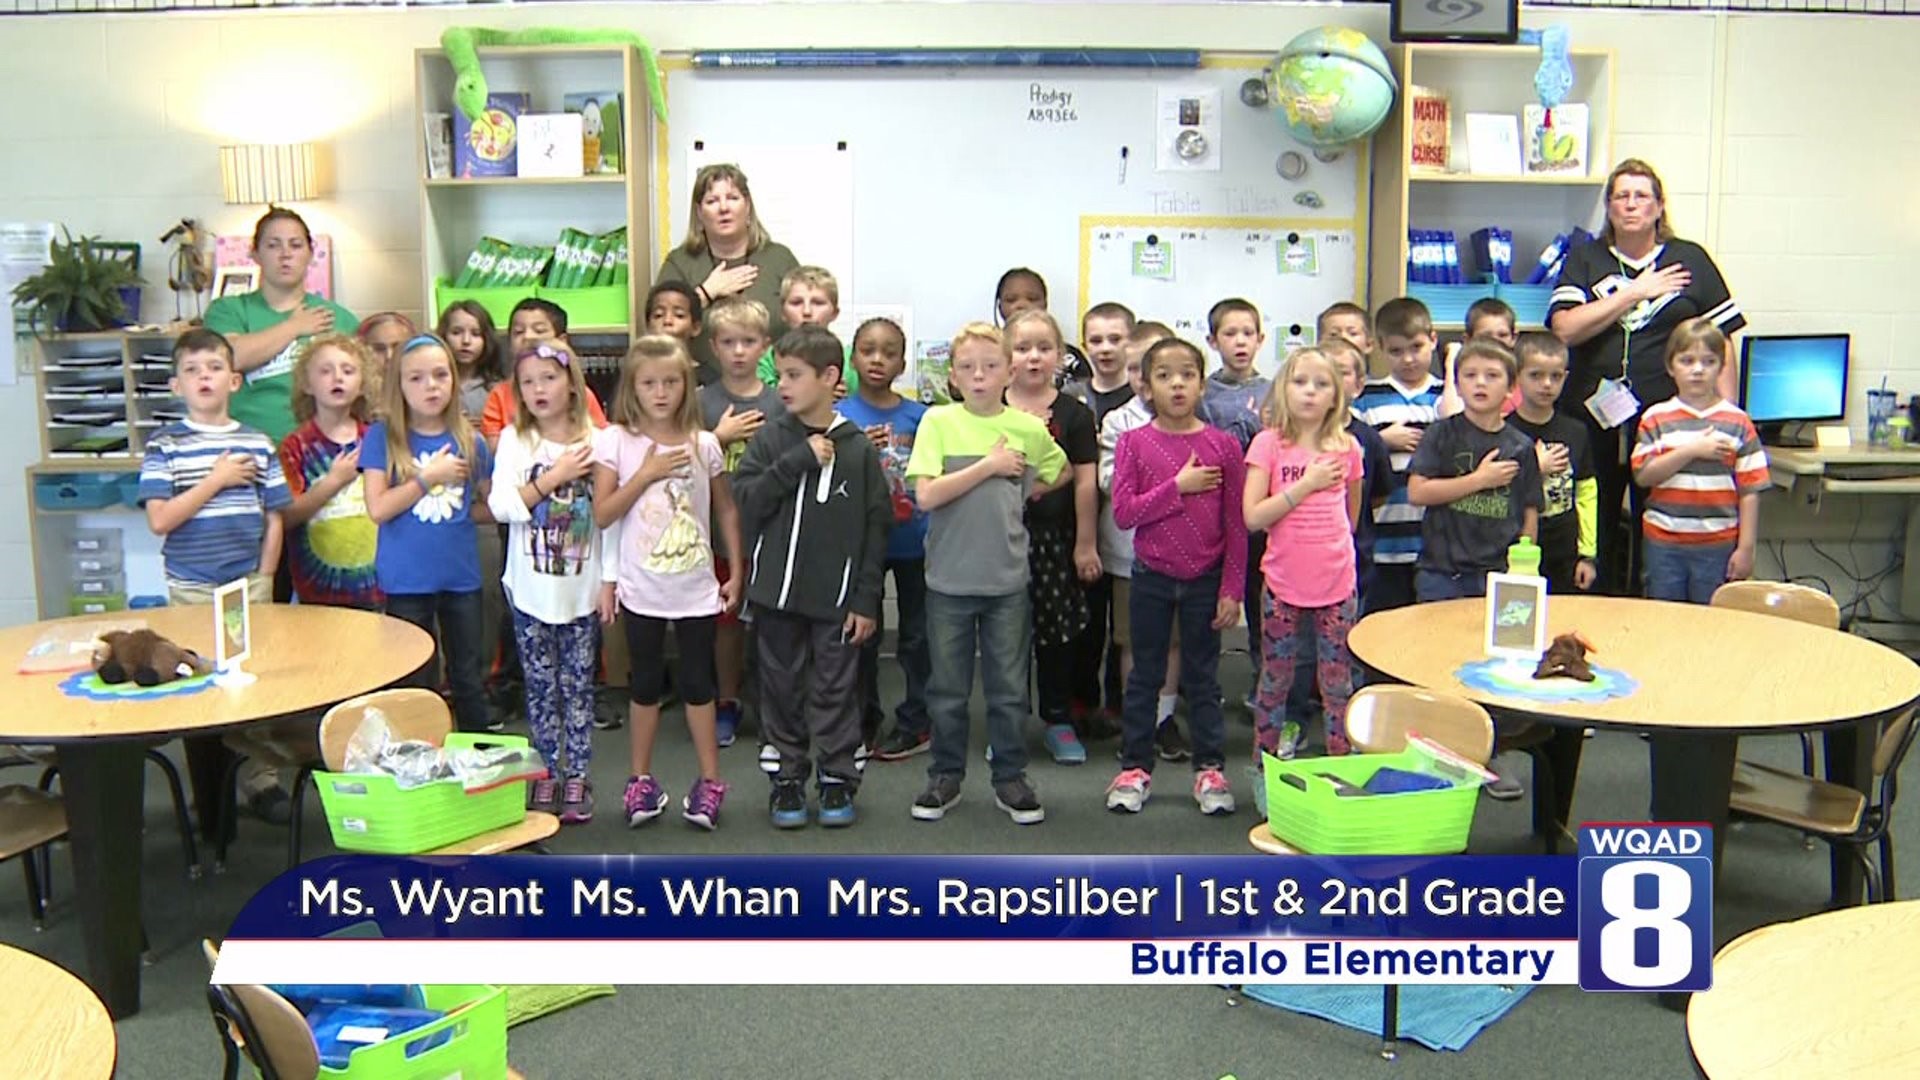 Buffalo Ms. Wyant Ms. Whan Wrs. Rapsilber 1st and 2nd pledge